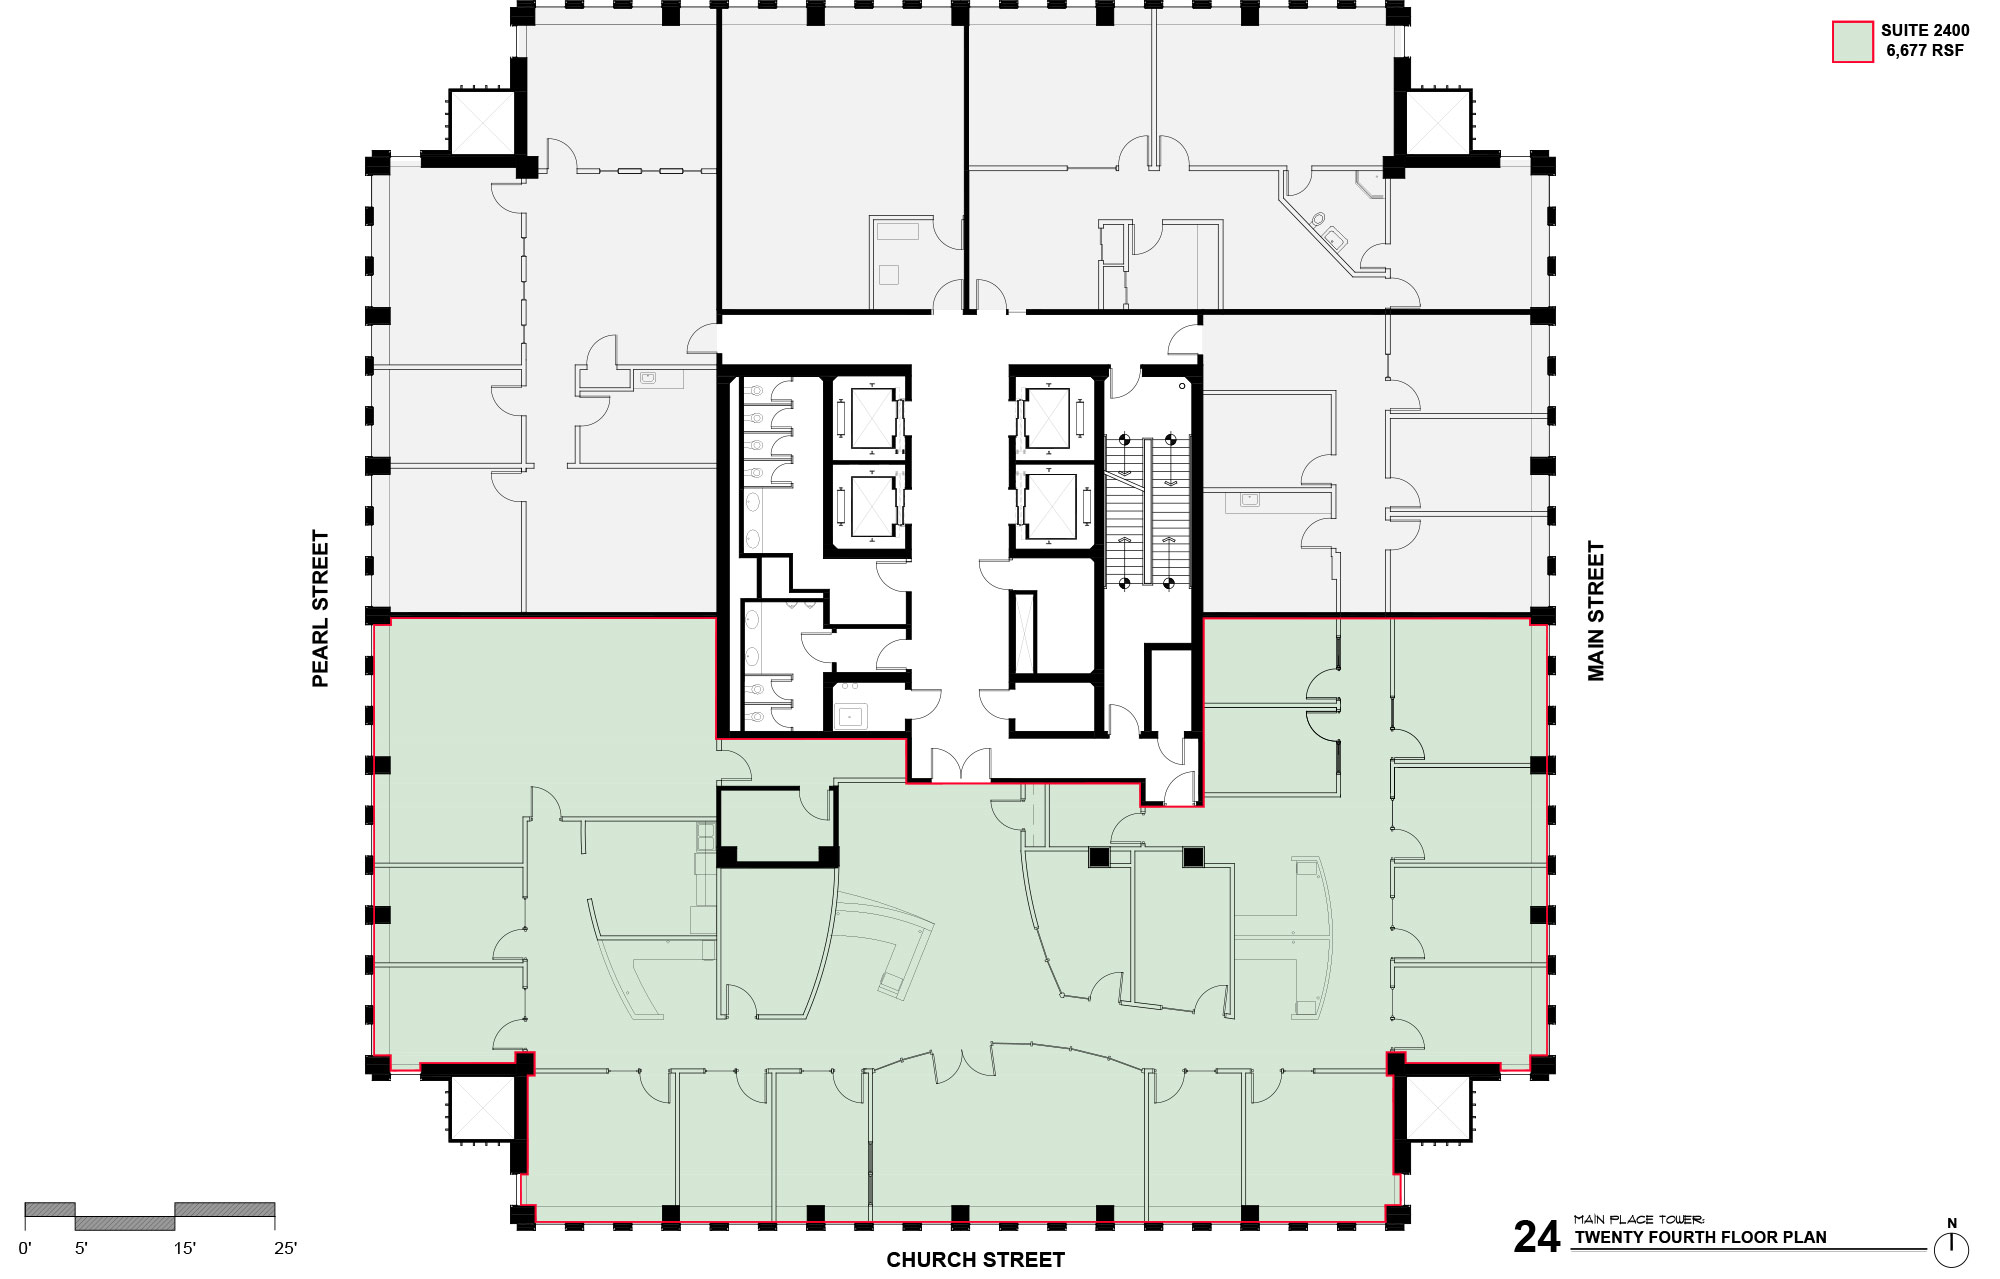 main place tower floor plan